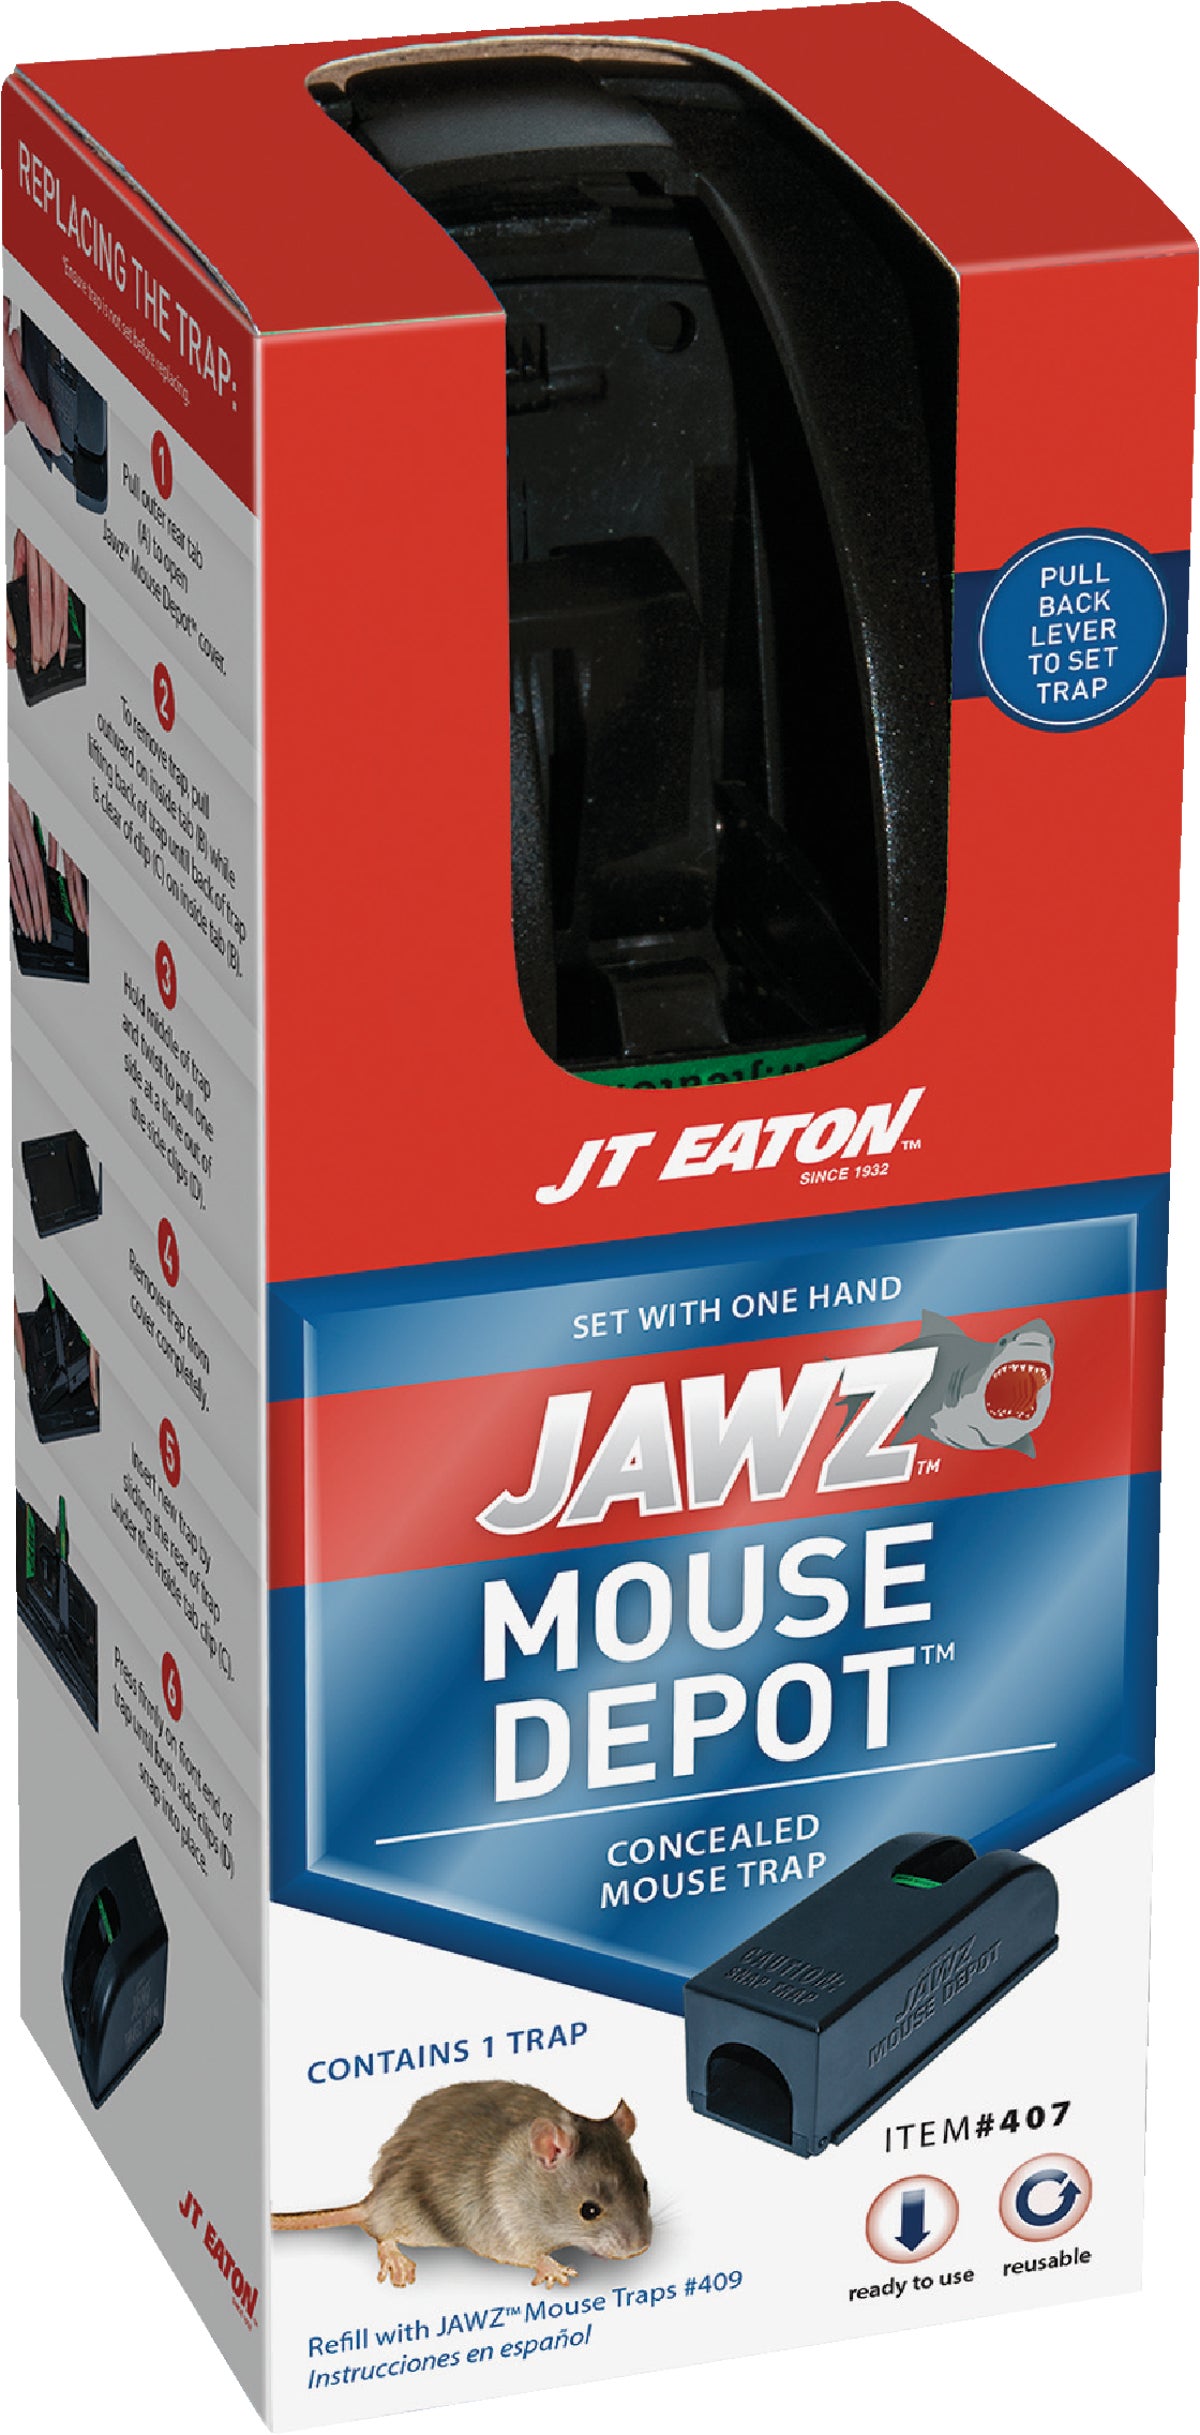 JT Eaton 407 Jawz Covered Mouse Trap